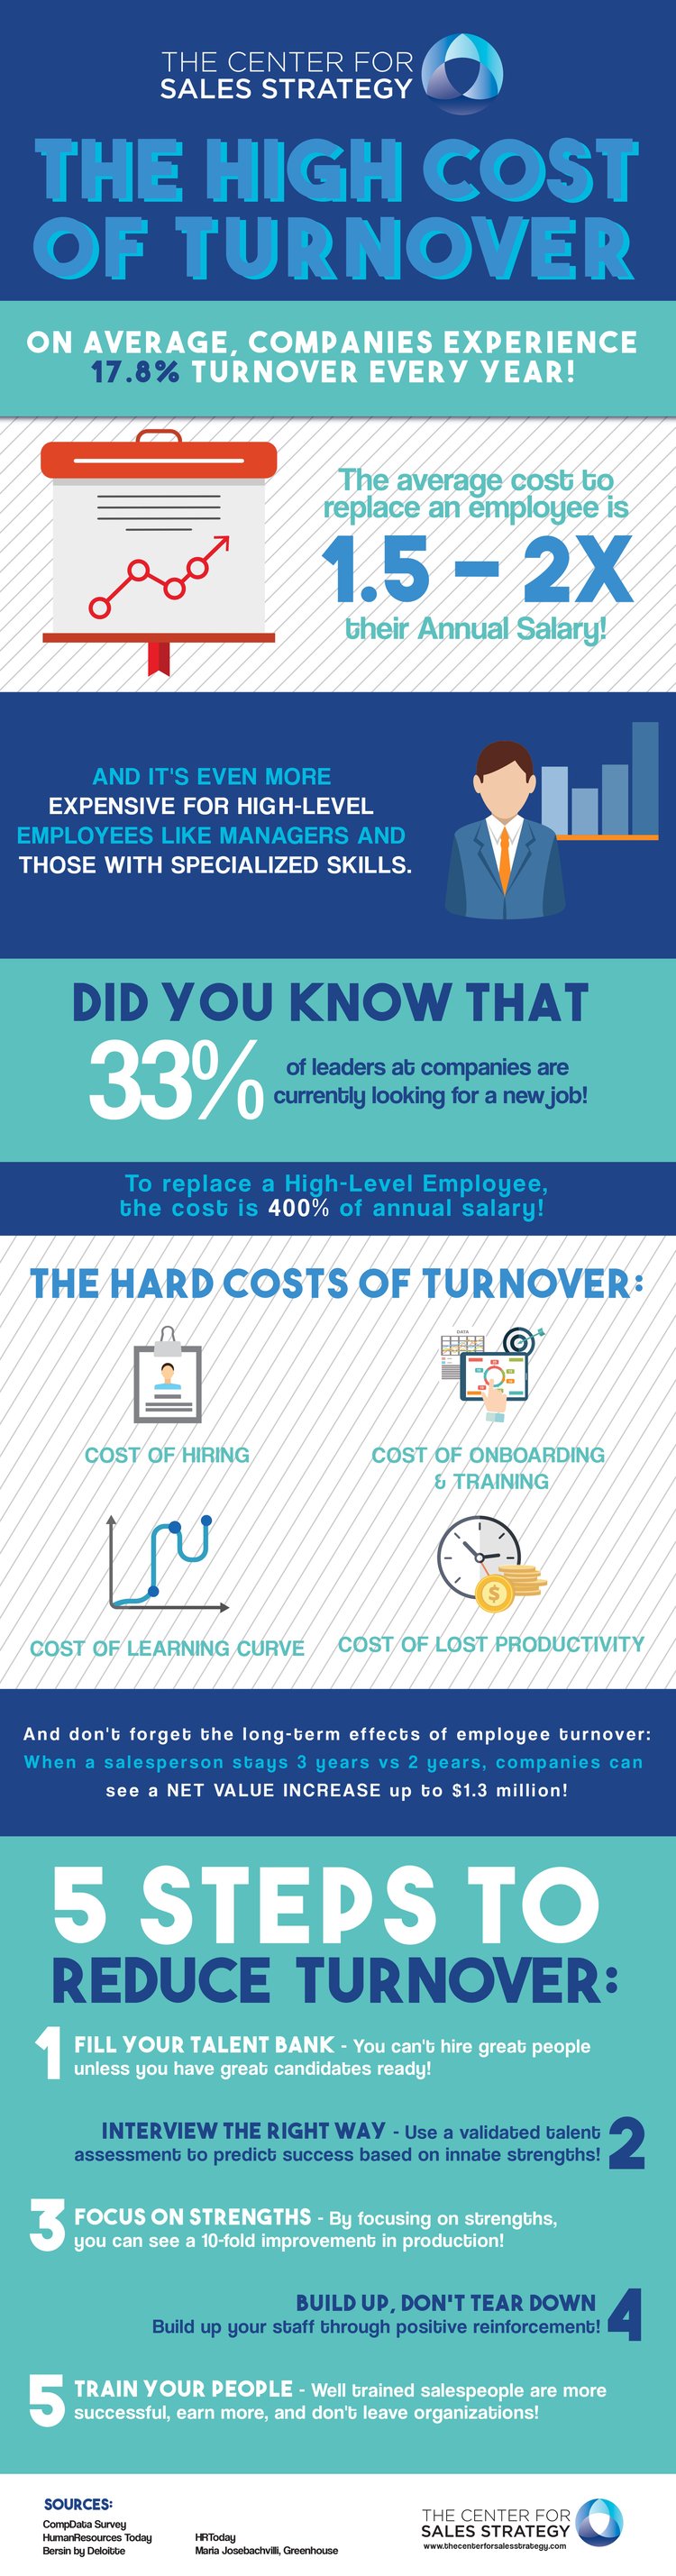 The High Cost Of Turnover_updated.jpg